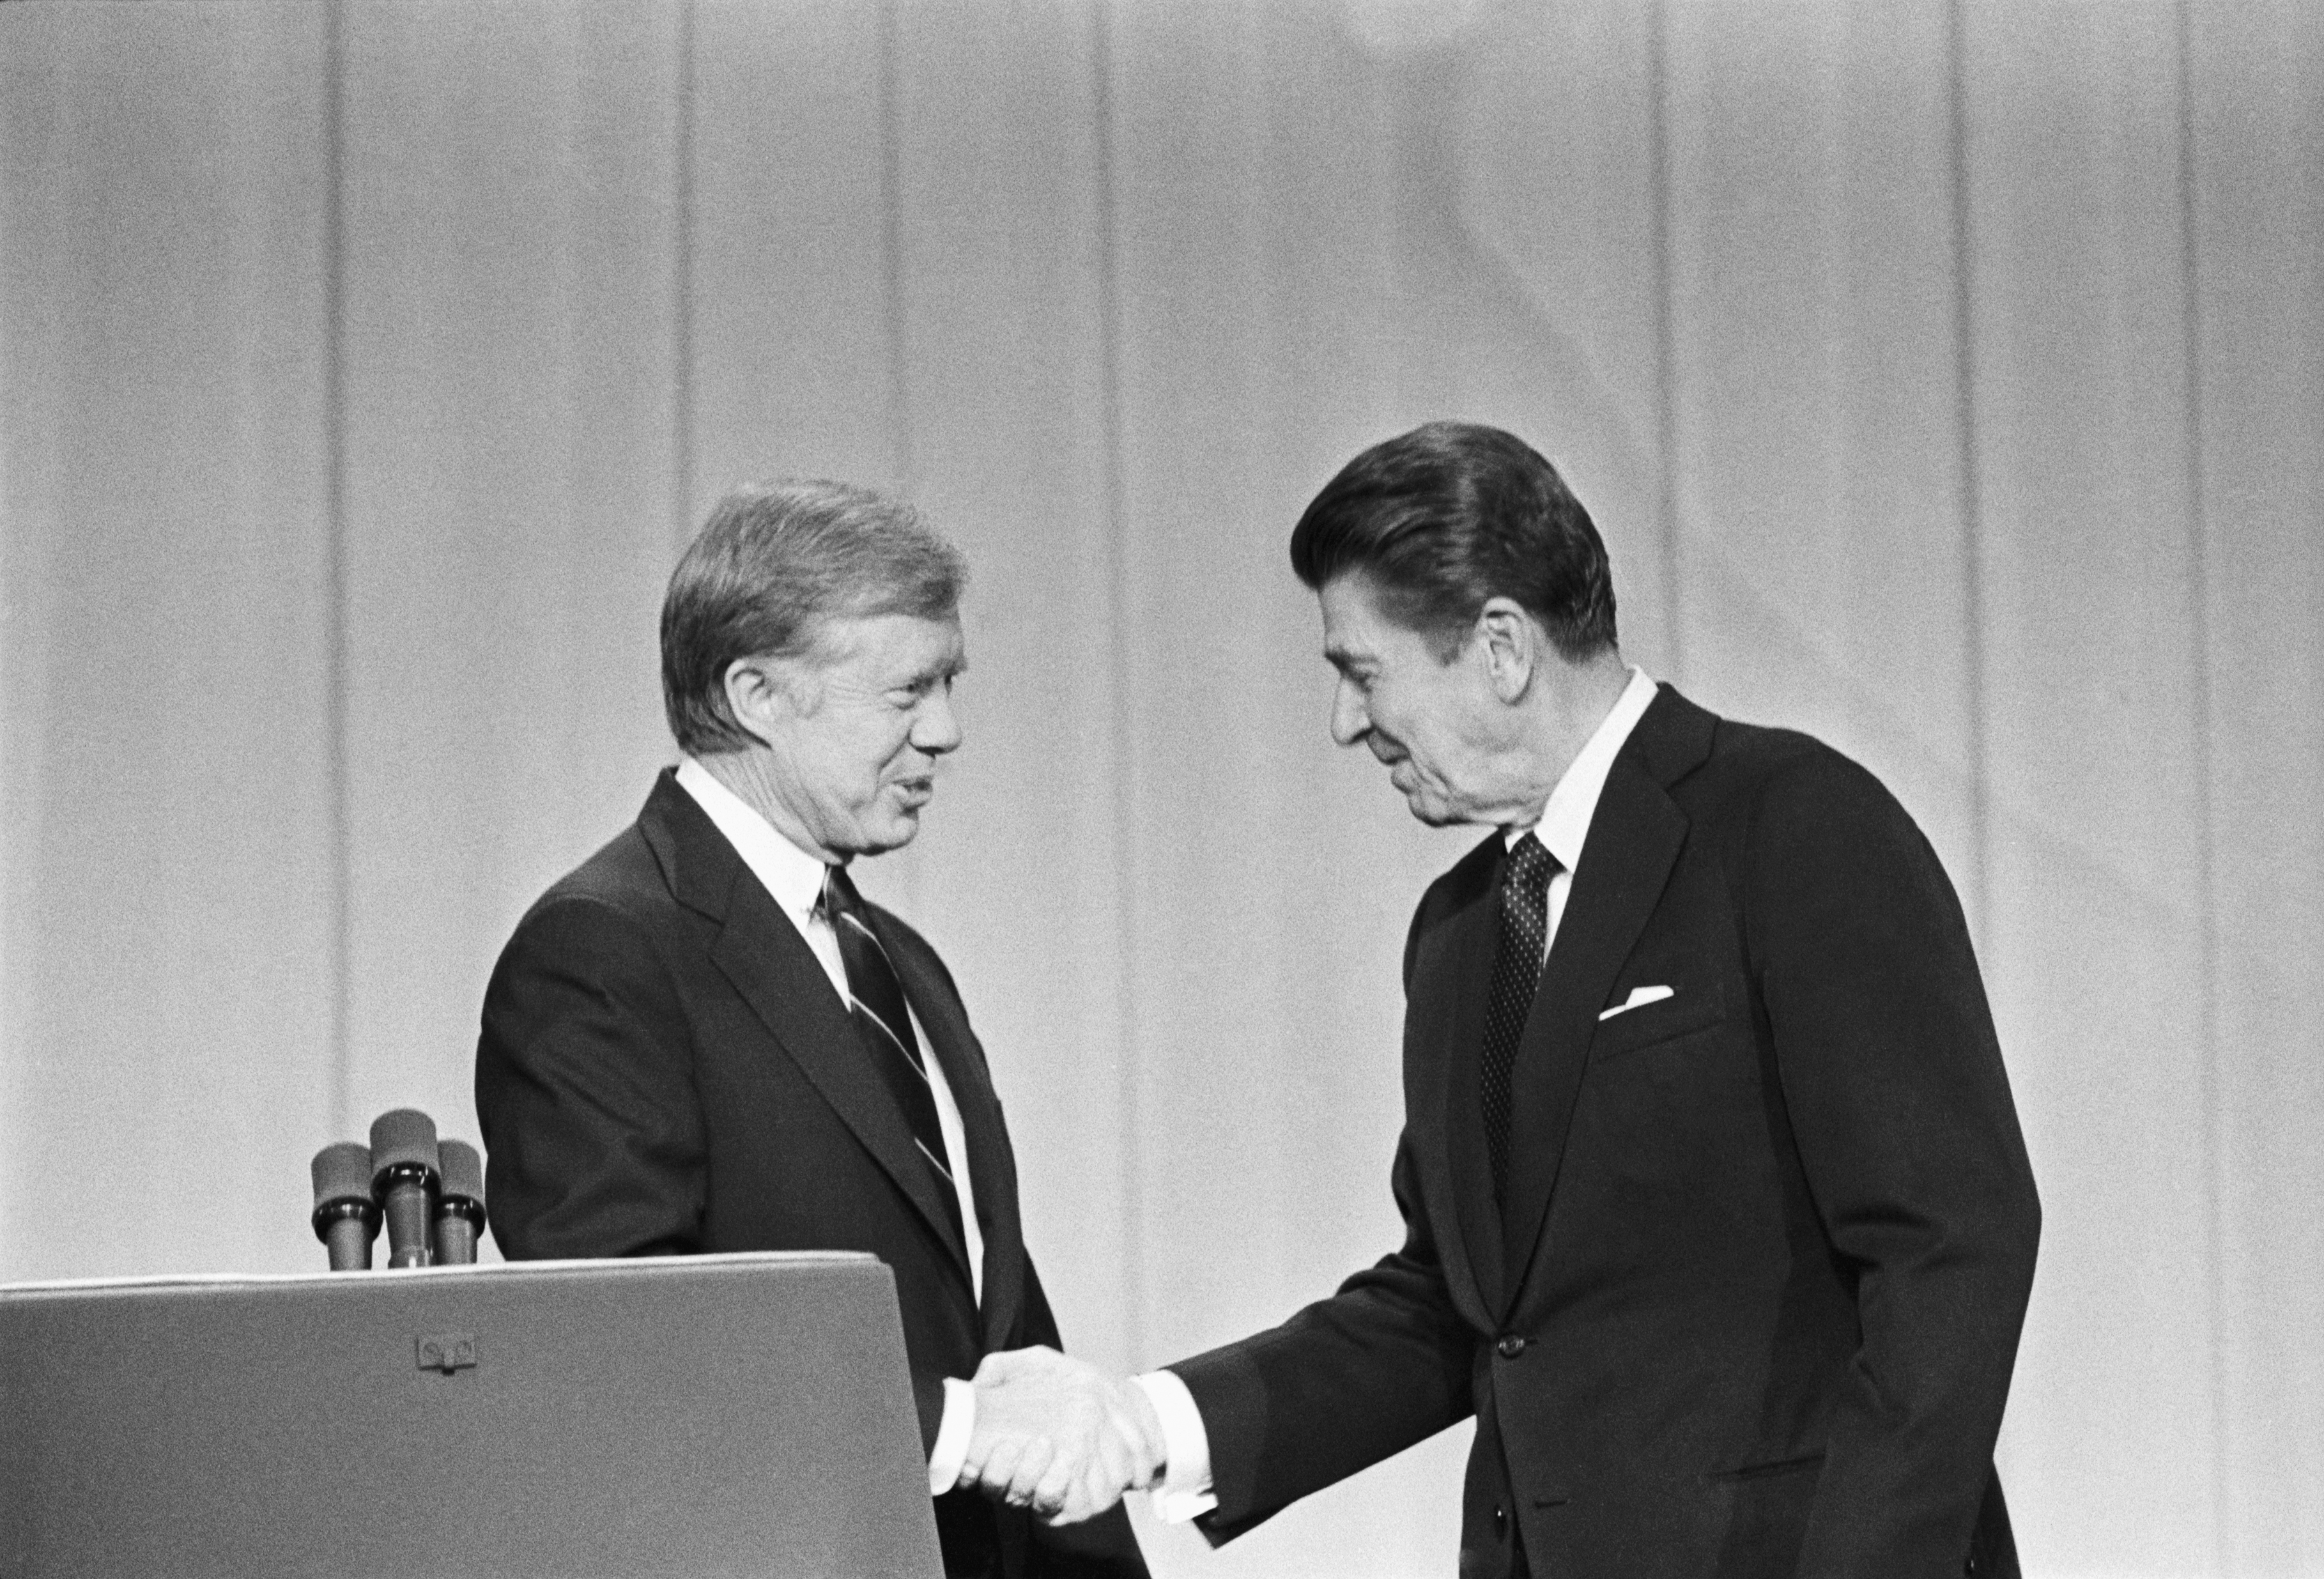 President Jimmy Carter and his Republican challenger, Ronald Reagan, shake hands as they greet one another before their debate on the stage of the Music Hall in Cleveland, Ohio. (Bettmann—Bettmann Archive)